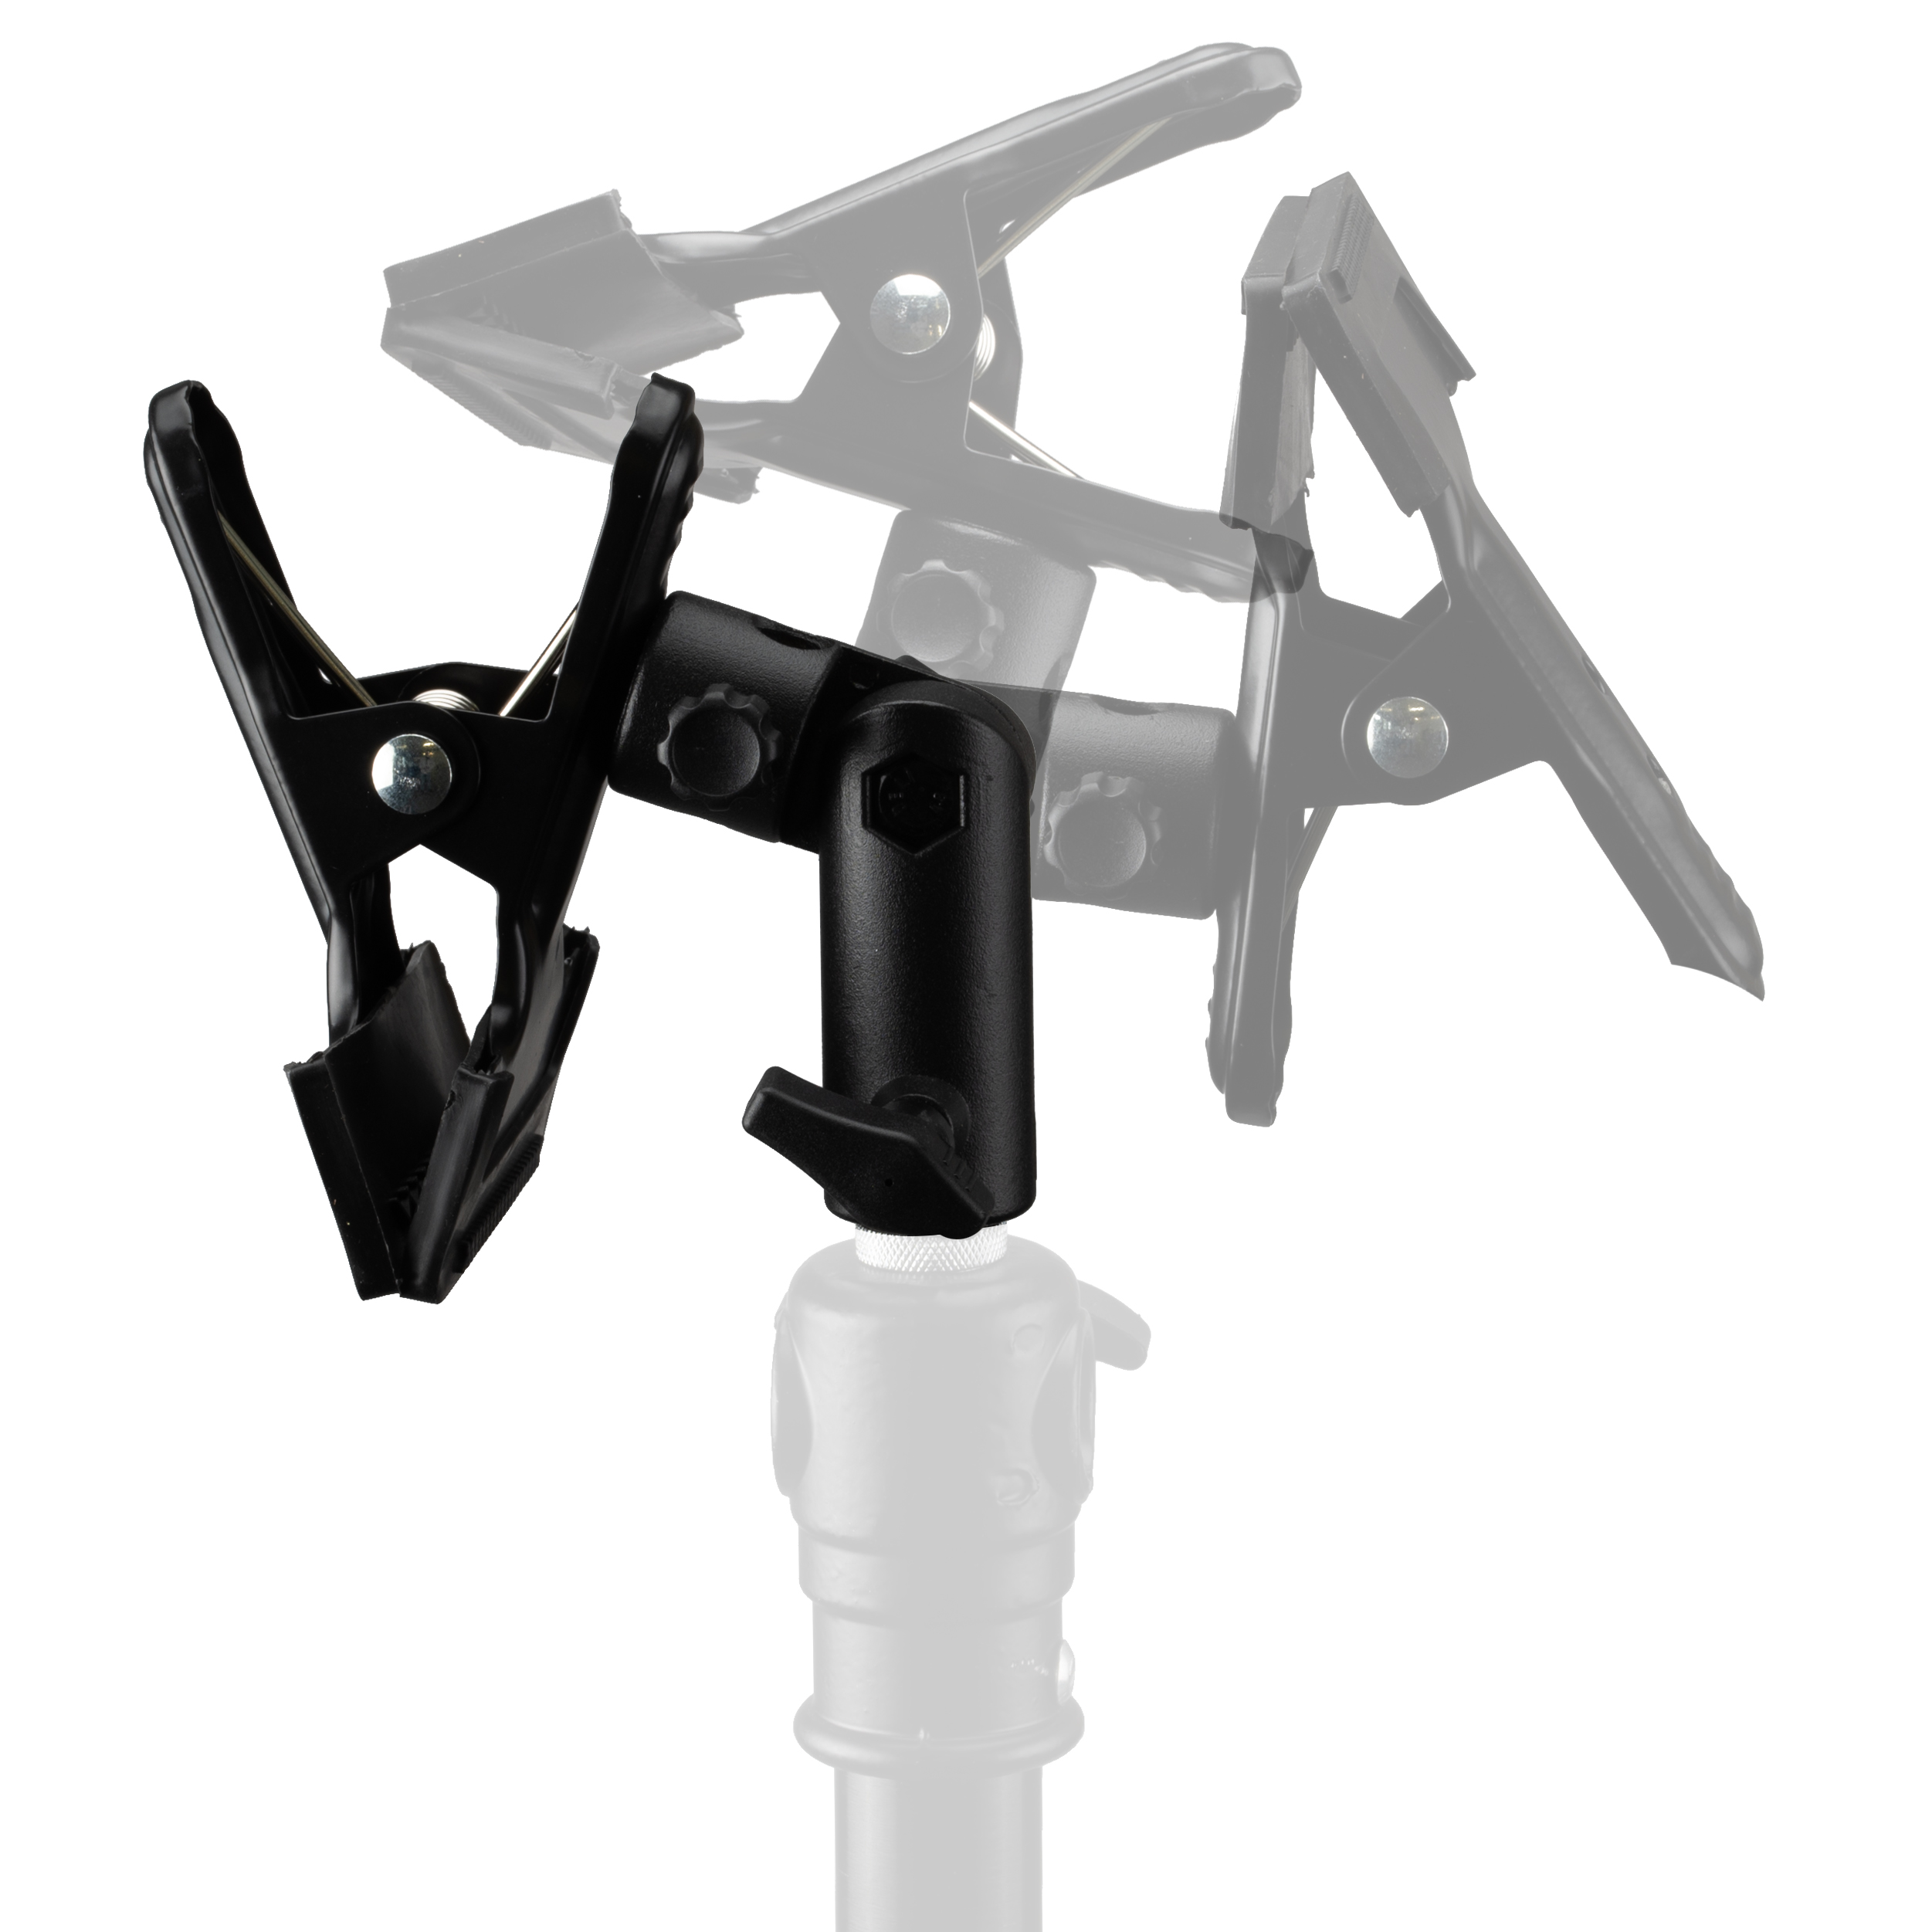 BRESSER BR-6 tiltable Support Clamp for collapsible Reflectors and Backgrounds